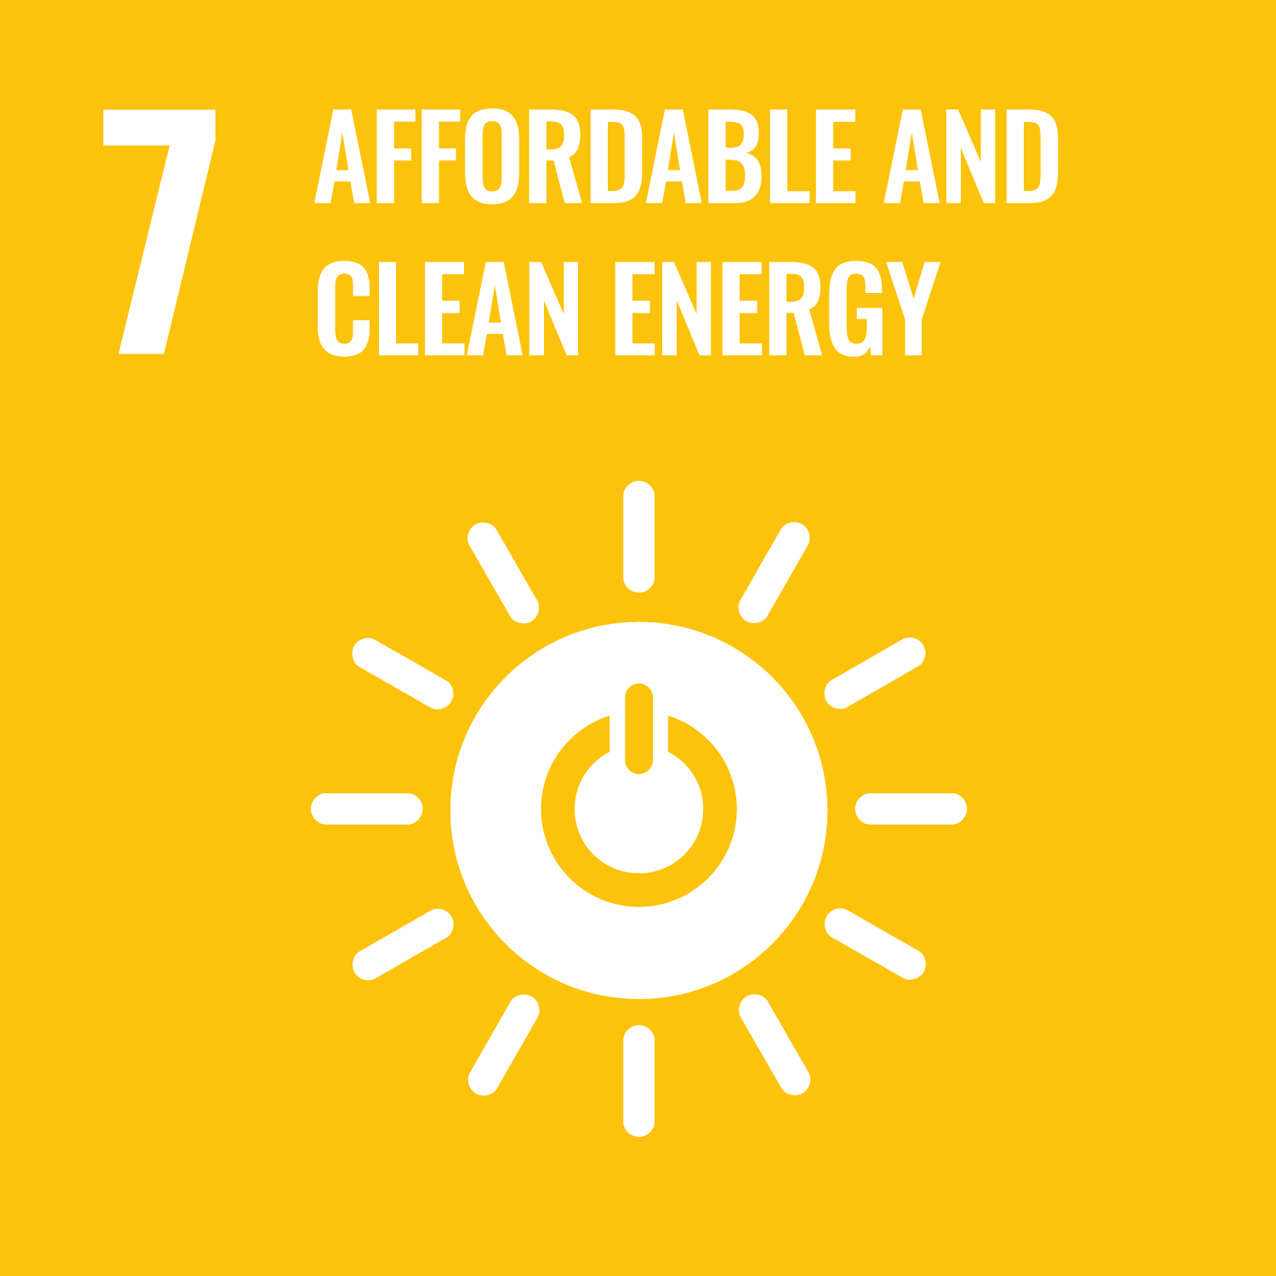 Goal 7. Affordable and clean energy